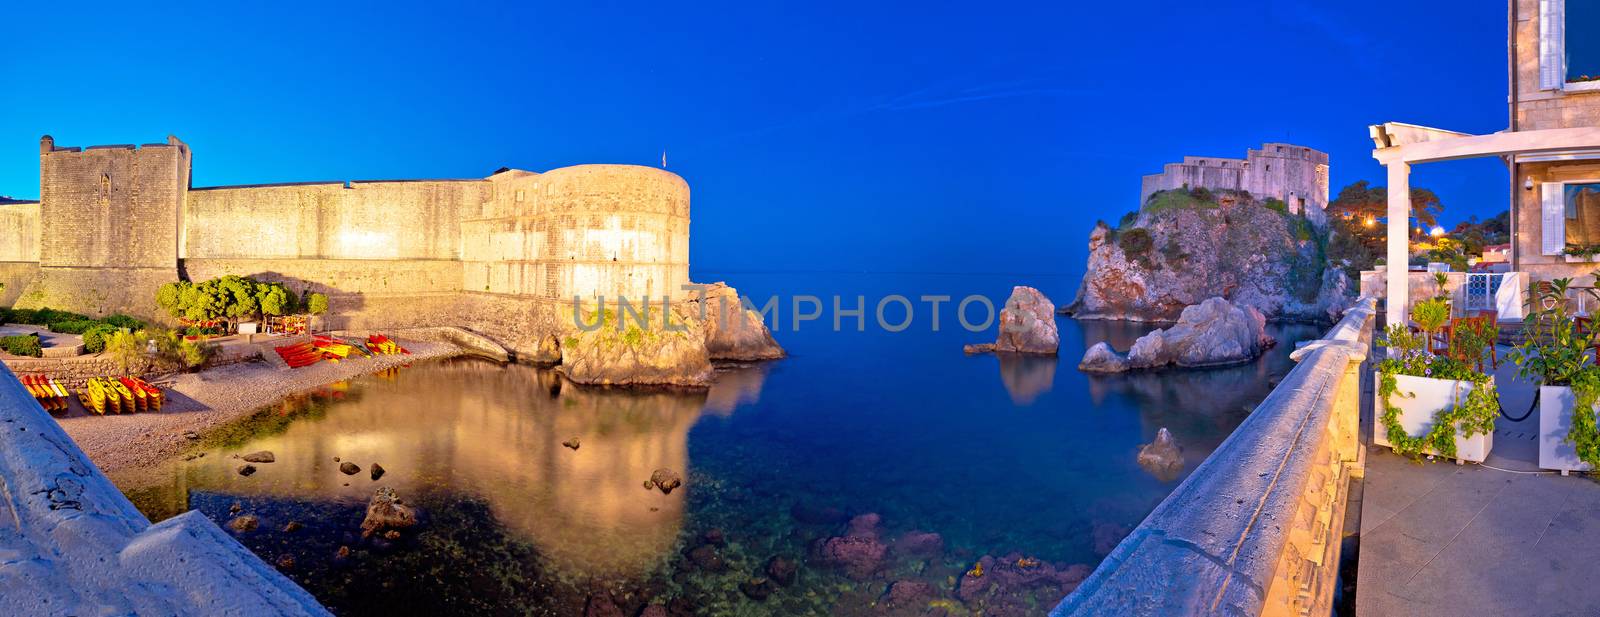 Dubrovnik walls evening panoramic view by xbrchx